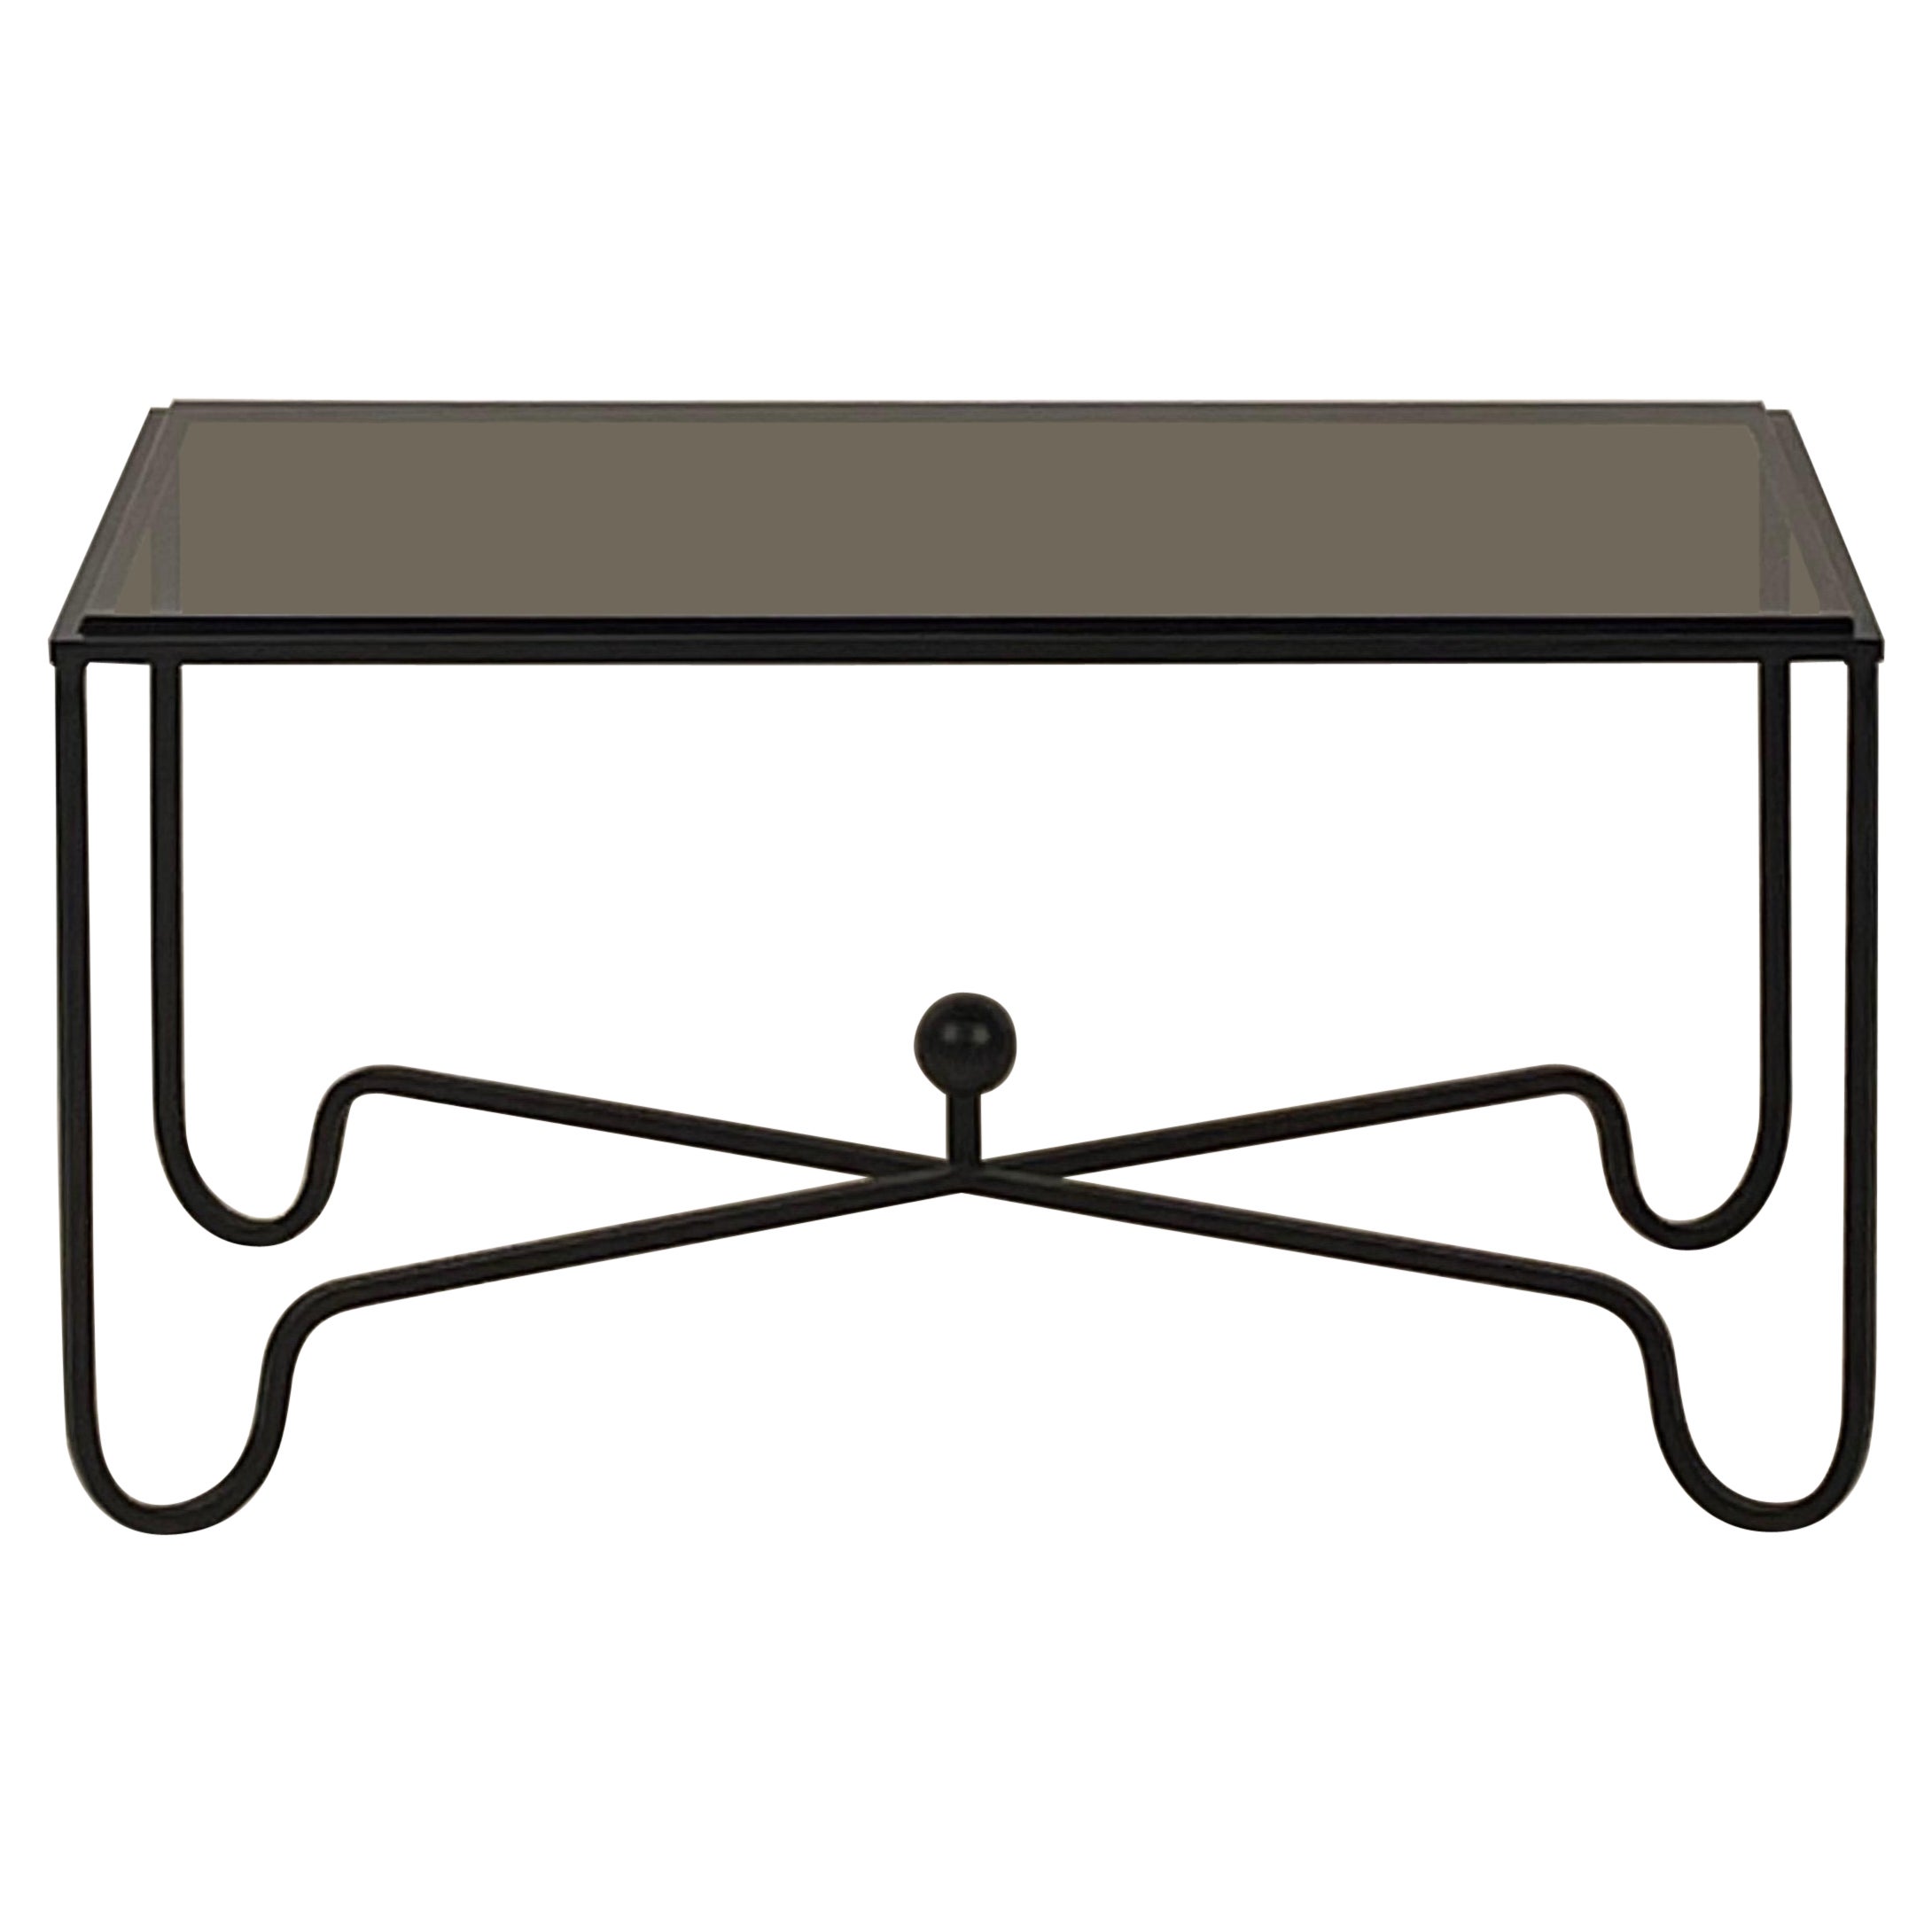 Large Blackened Iron and Glass 'Entretoise' Coffee Table by Design Frères